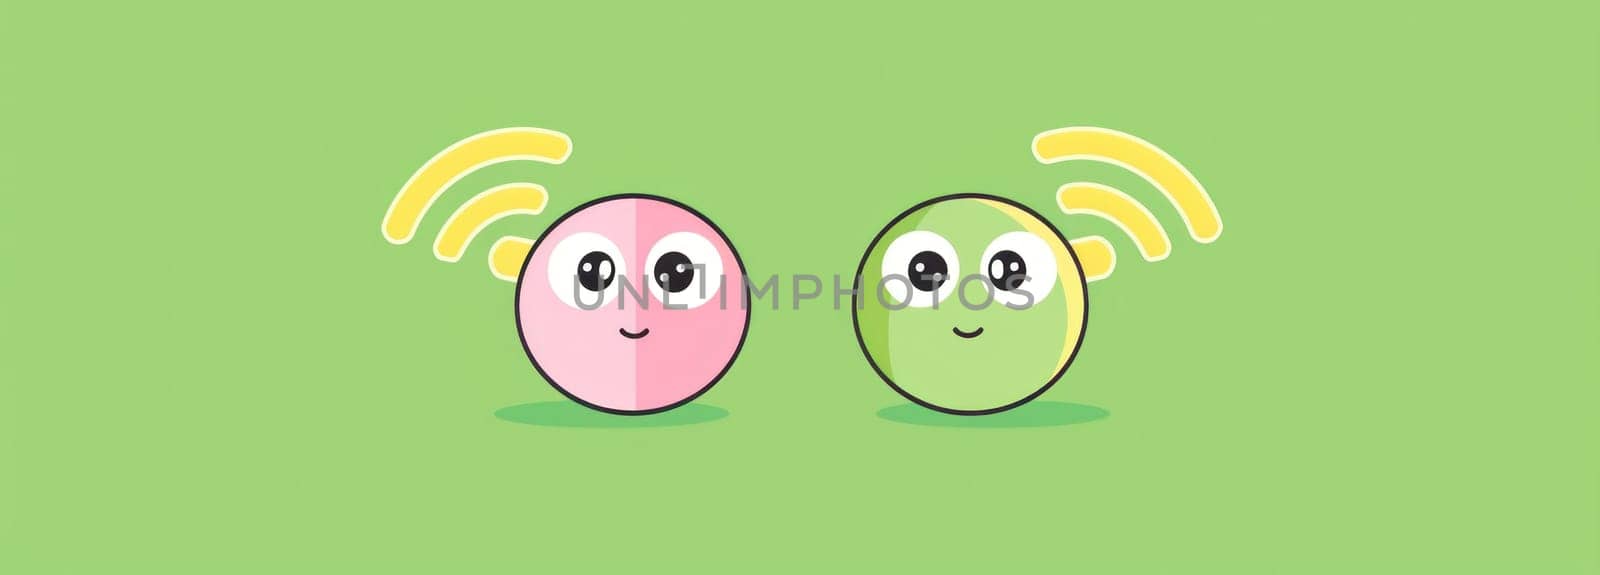 Cheerful easter eggs with colorful faces on green and pink backgrounds for holiday celebrations by Vichizh